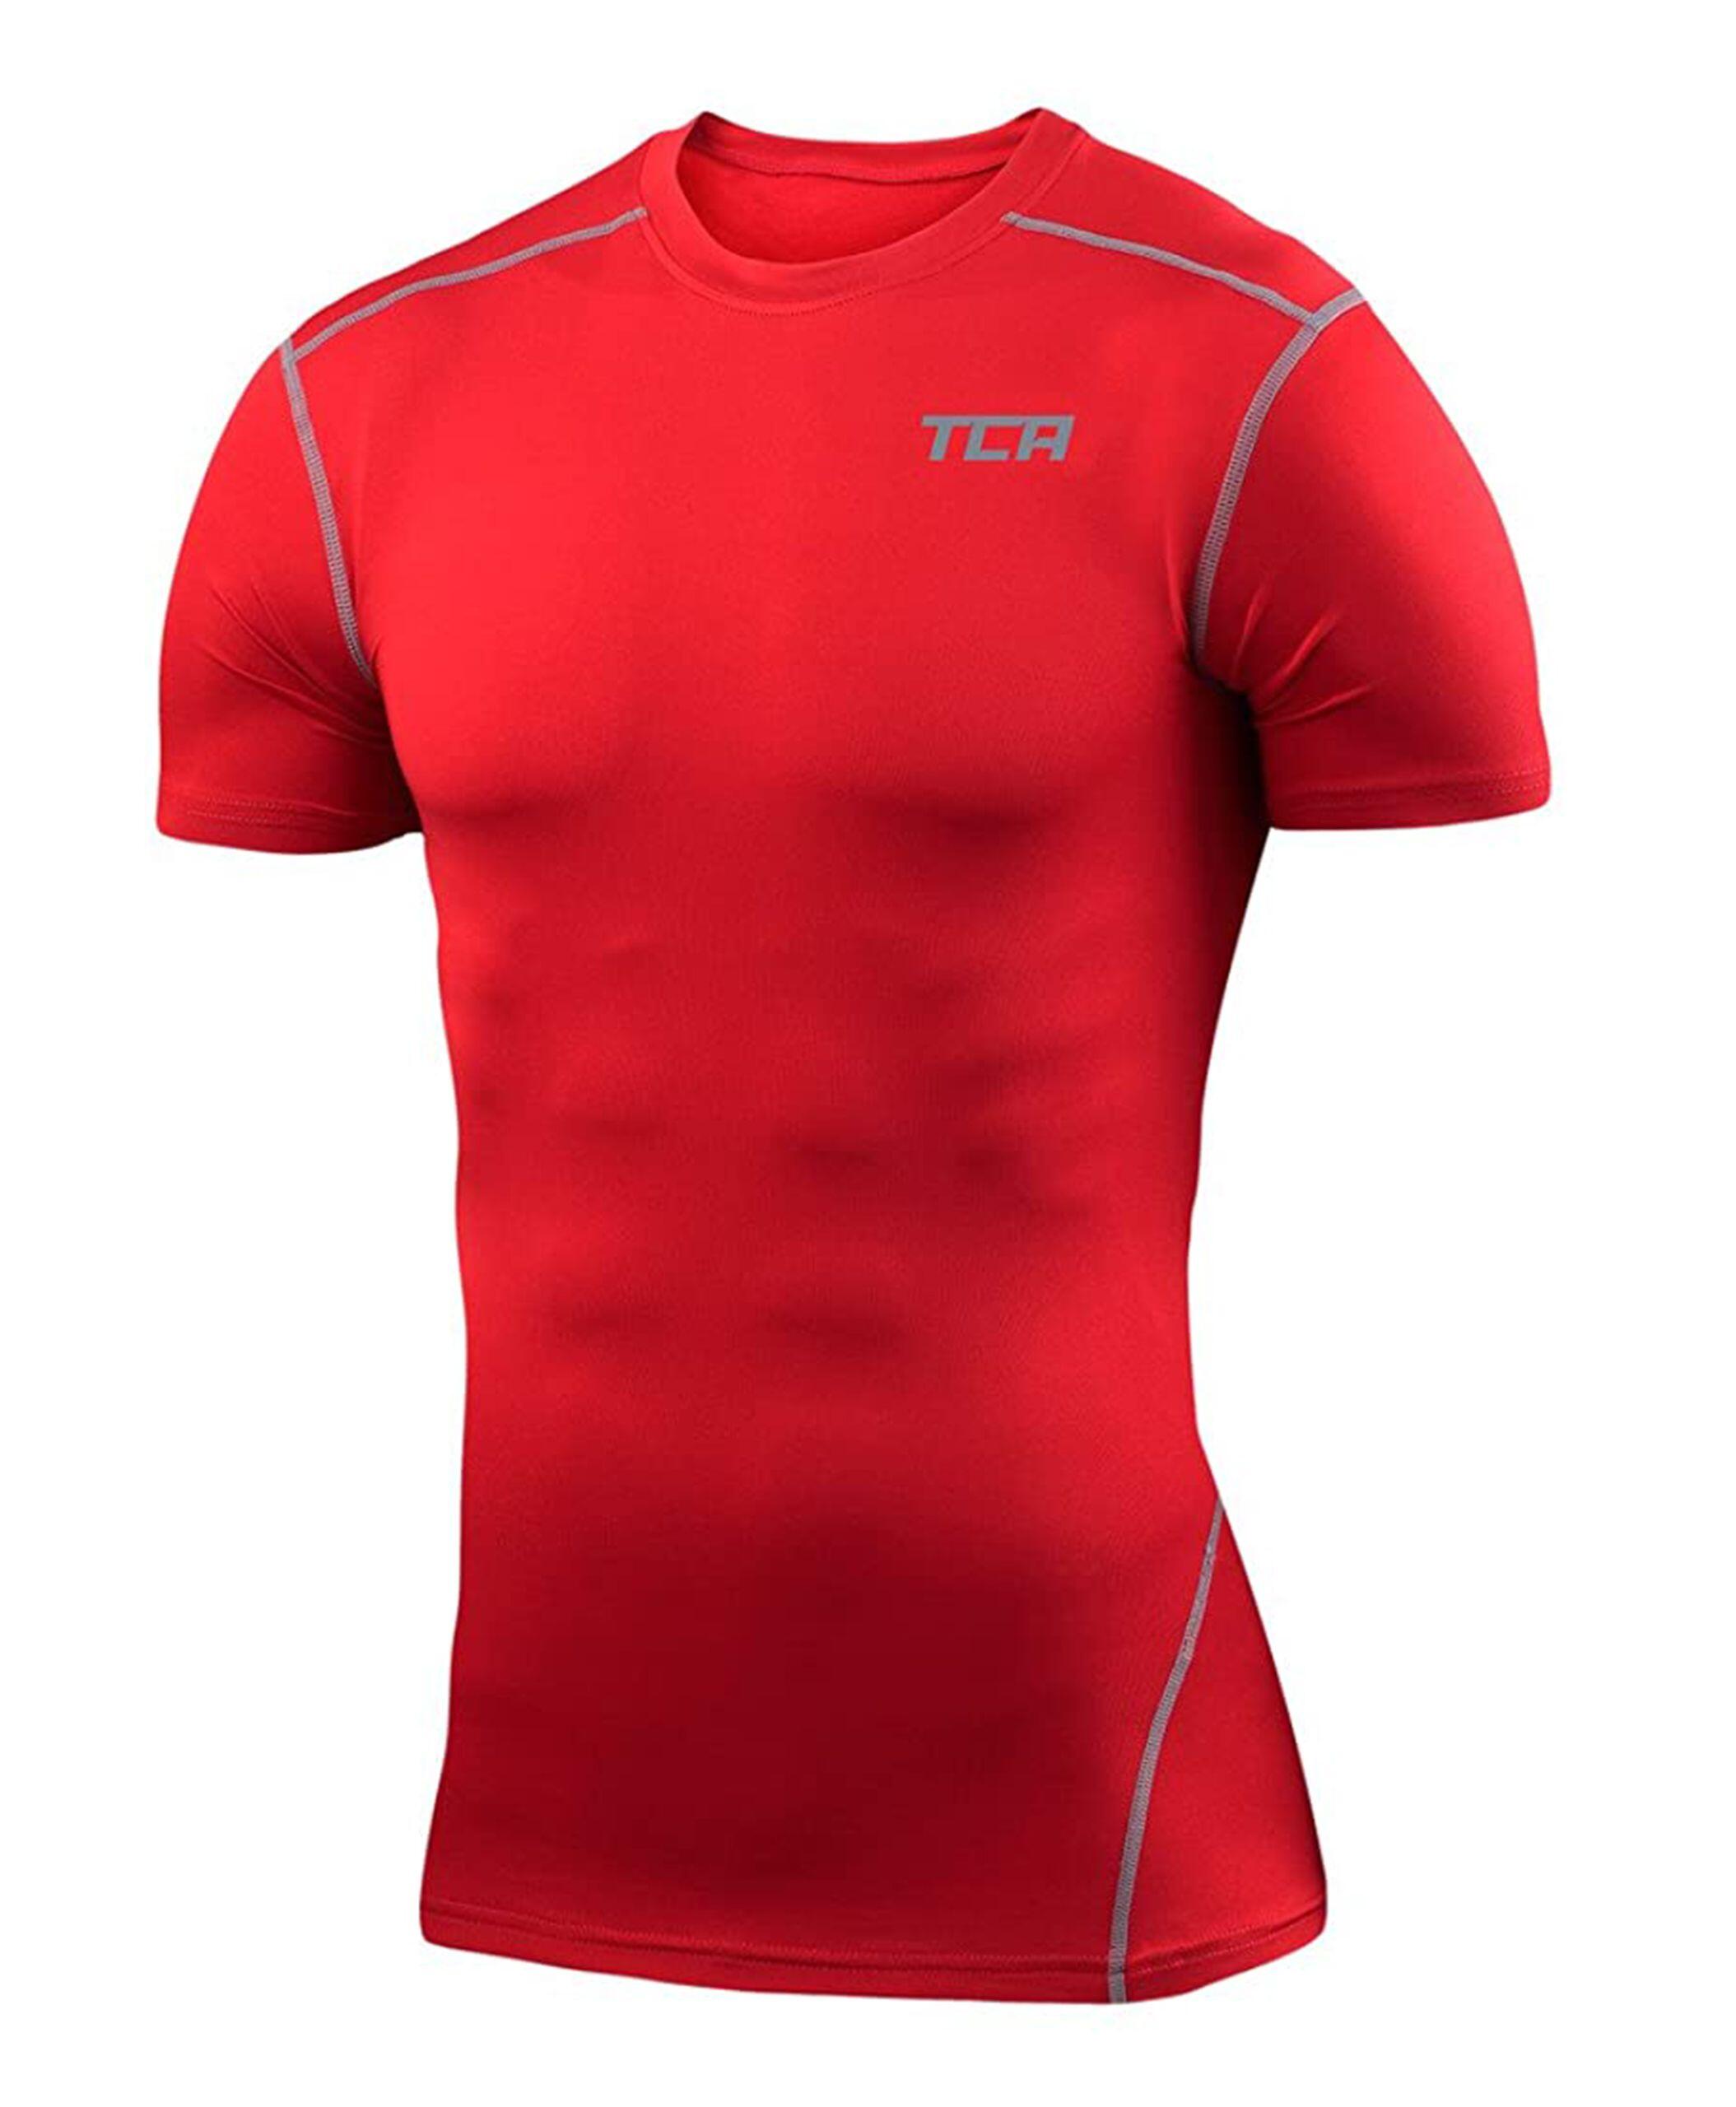 Boys' Performance Base Layer Compression T-shirt - Team Red 1/3